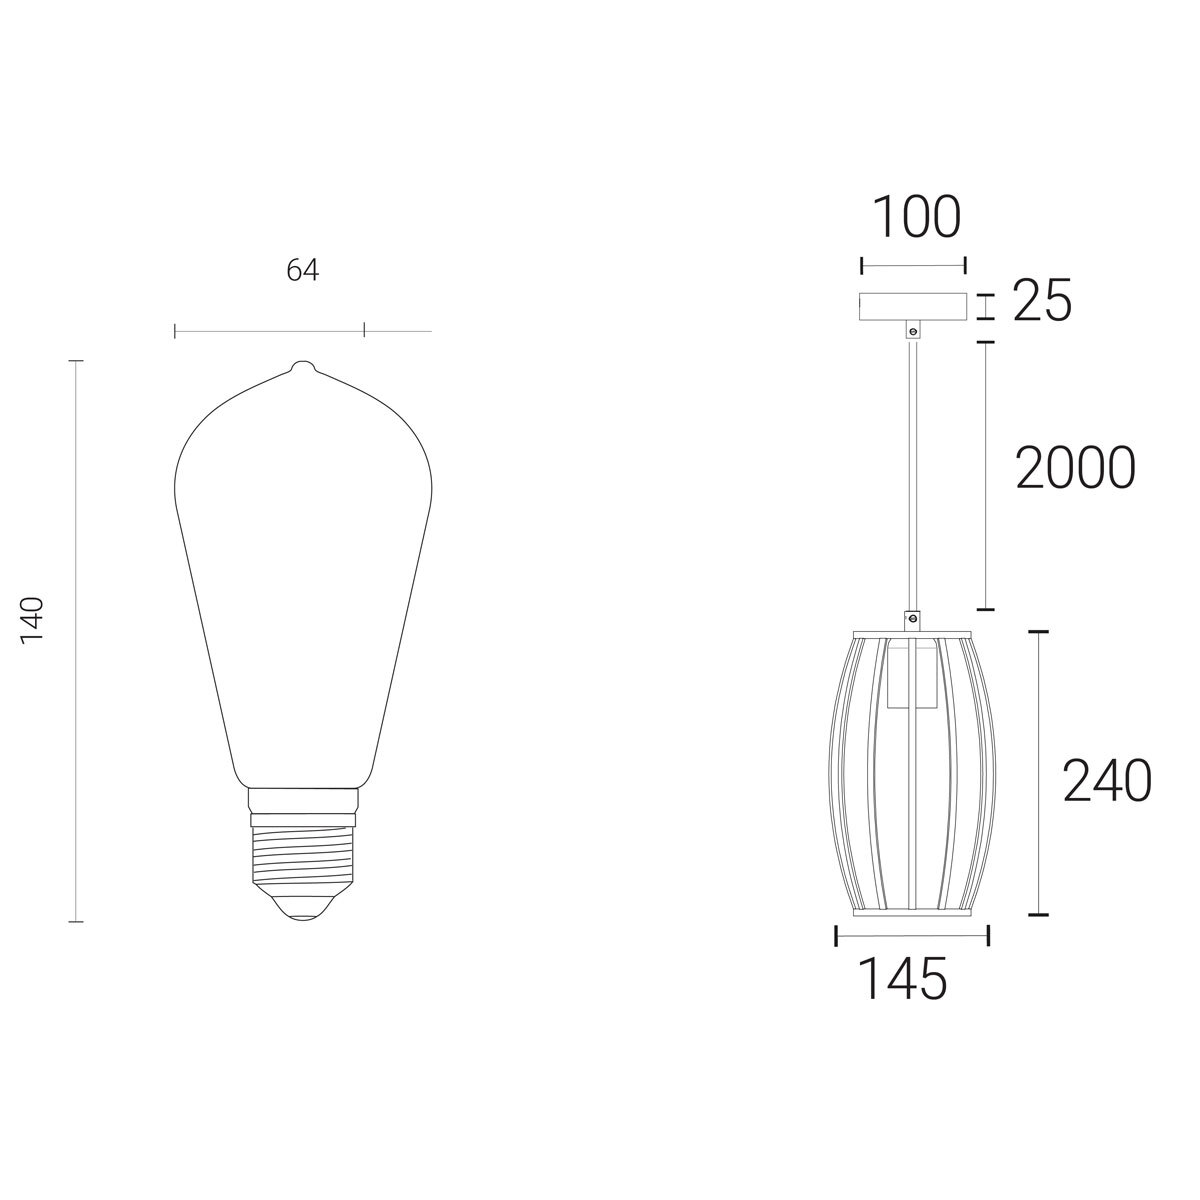 Line drawing of light on white background with dimensions